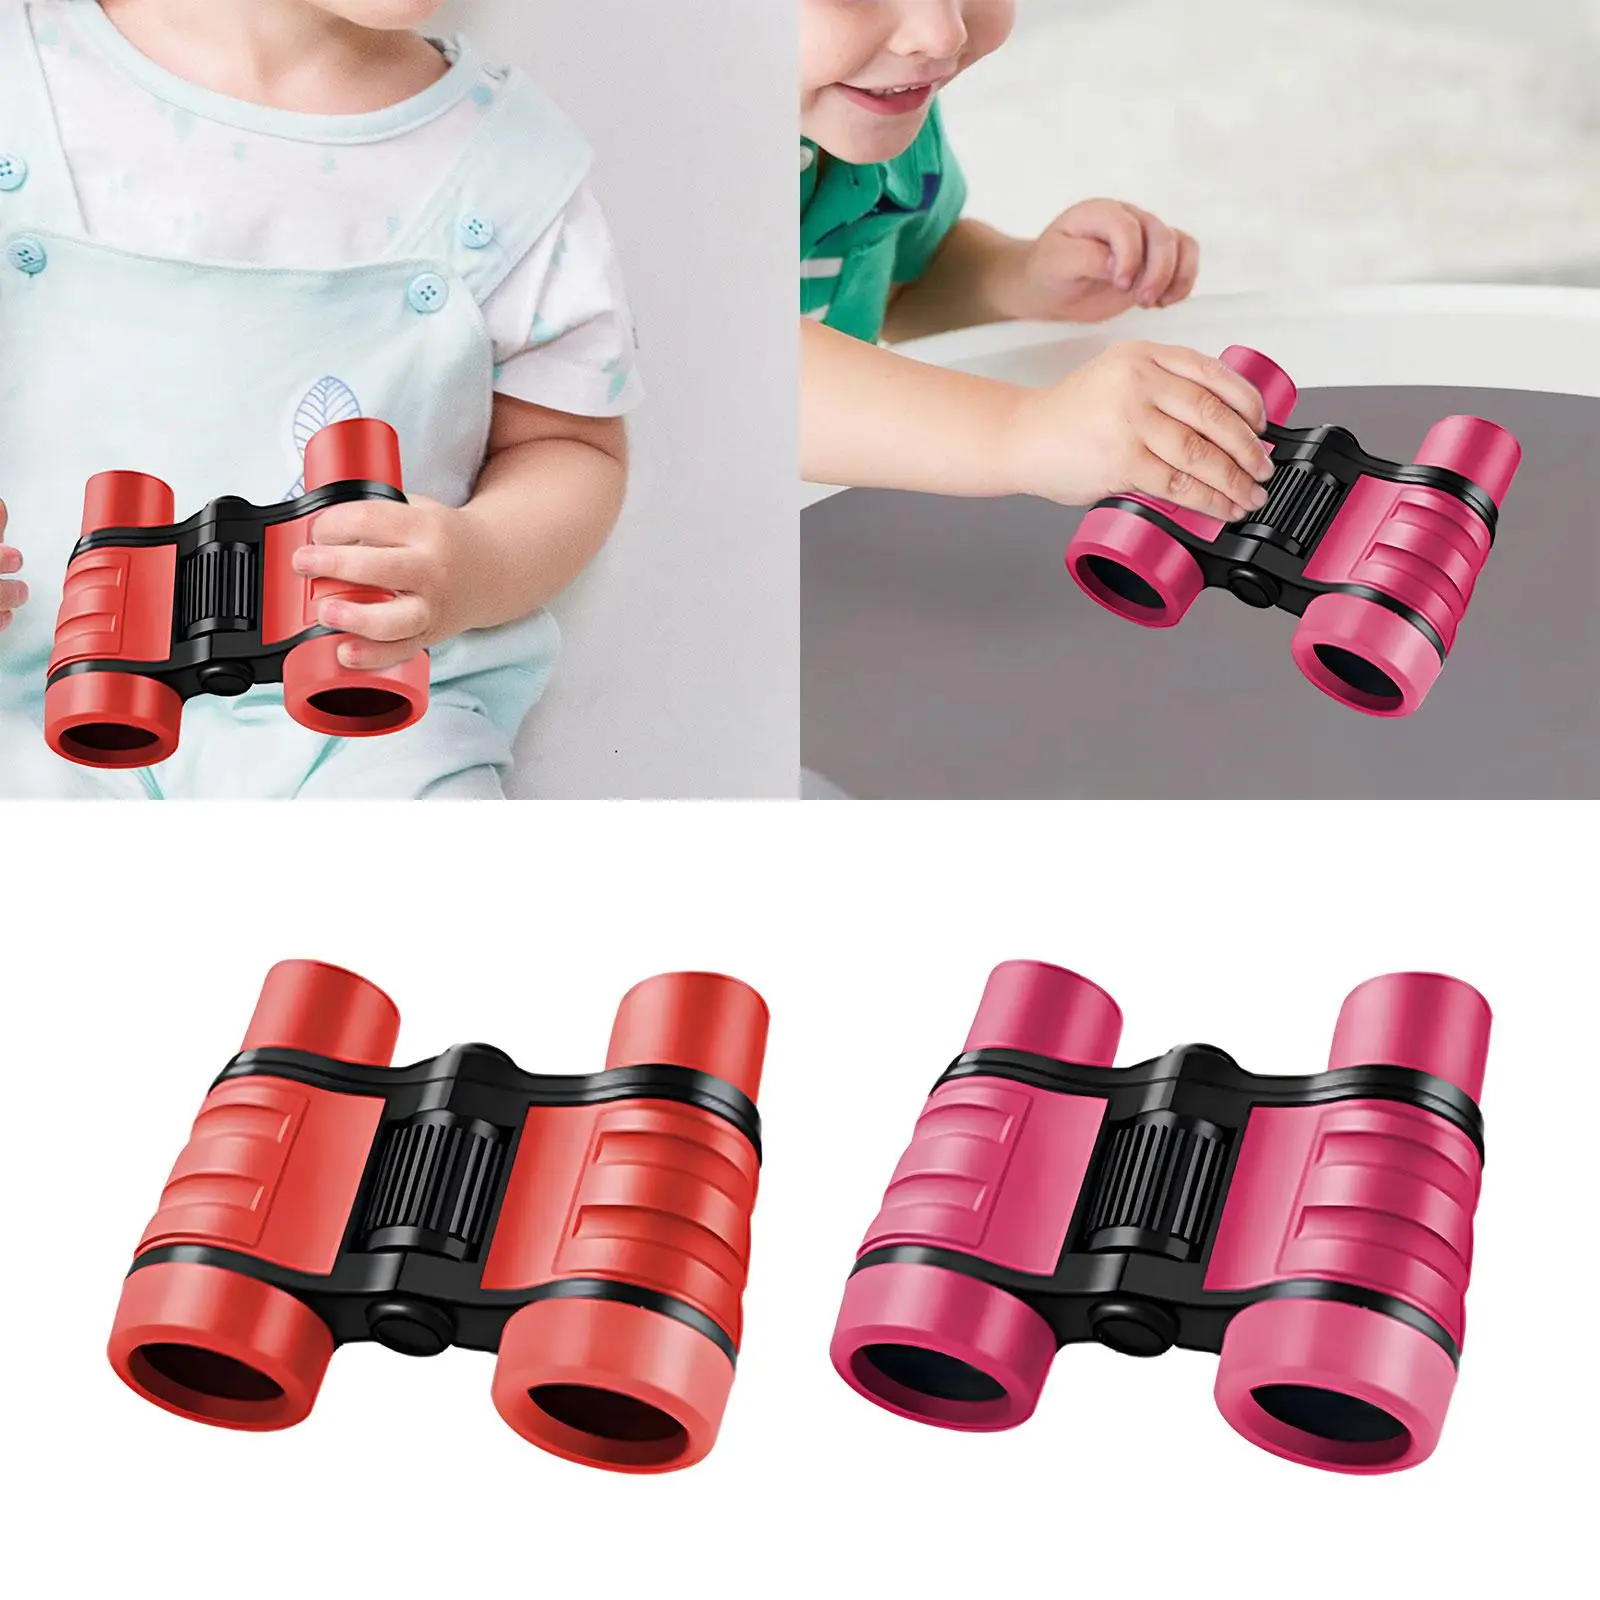 Kids Binoculars Toy 4x30 Learning Portable Children Magnification Toy for Outdoor Activity Hiking Present Ages 3-12 Years